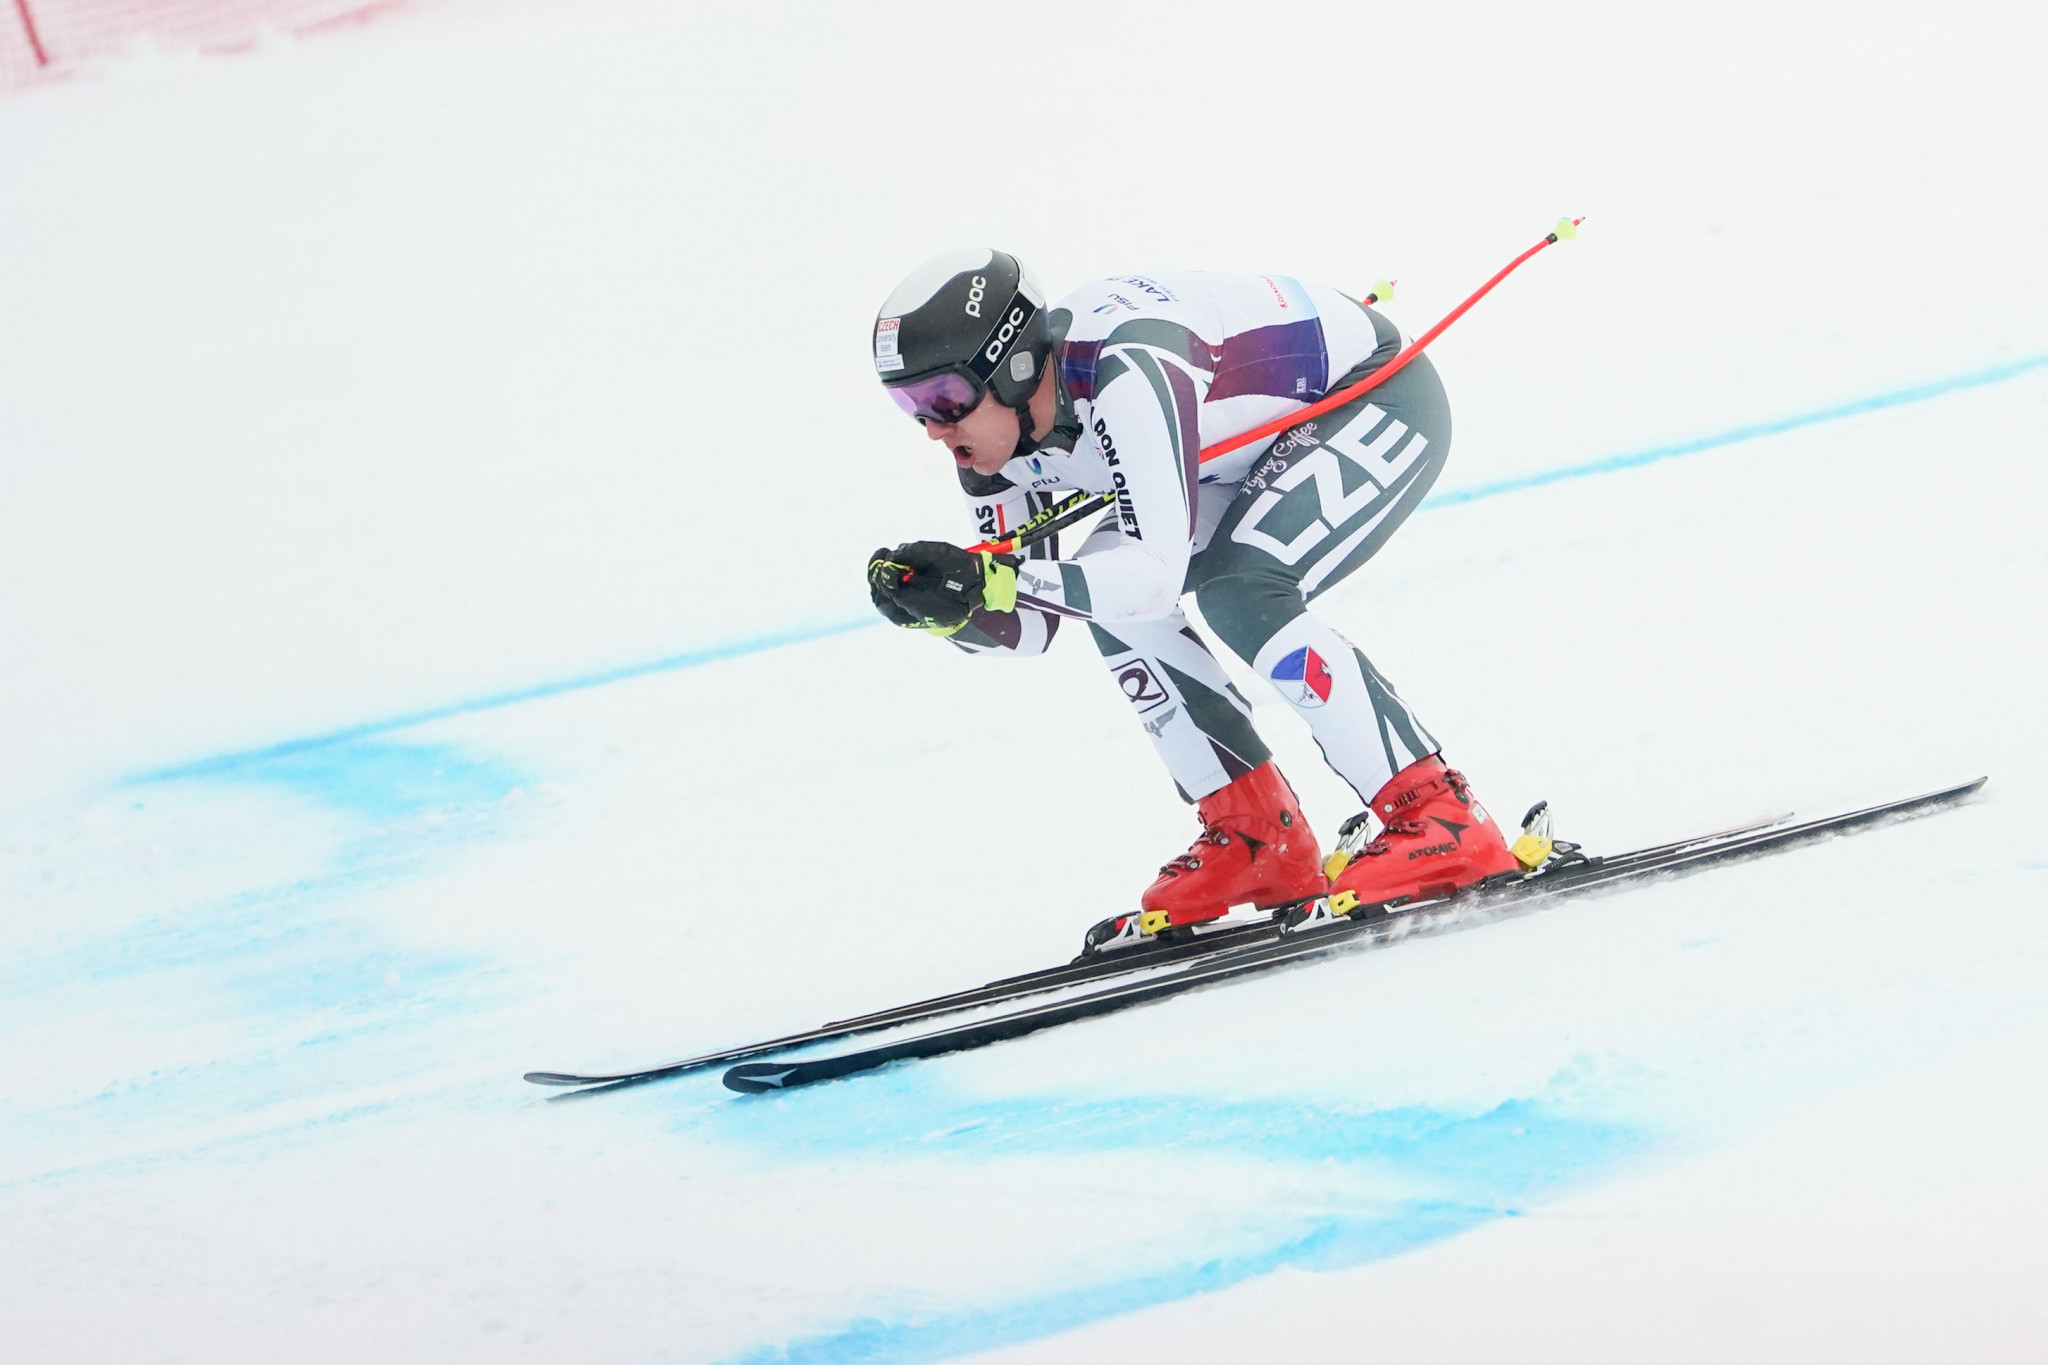 Czech Republic's Jan Zabystran secured his country's first gold medal at Lake Placid 2023 in the men's Super-G ©FISU